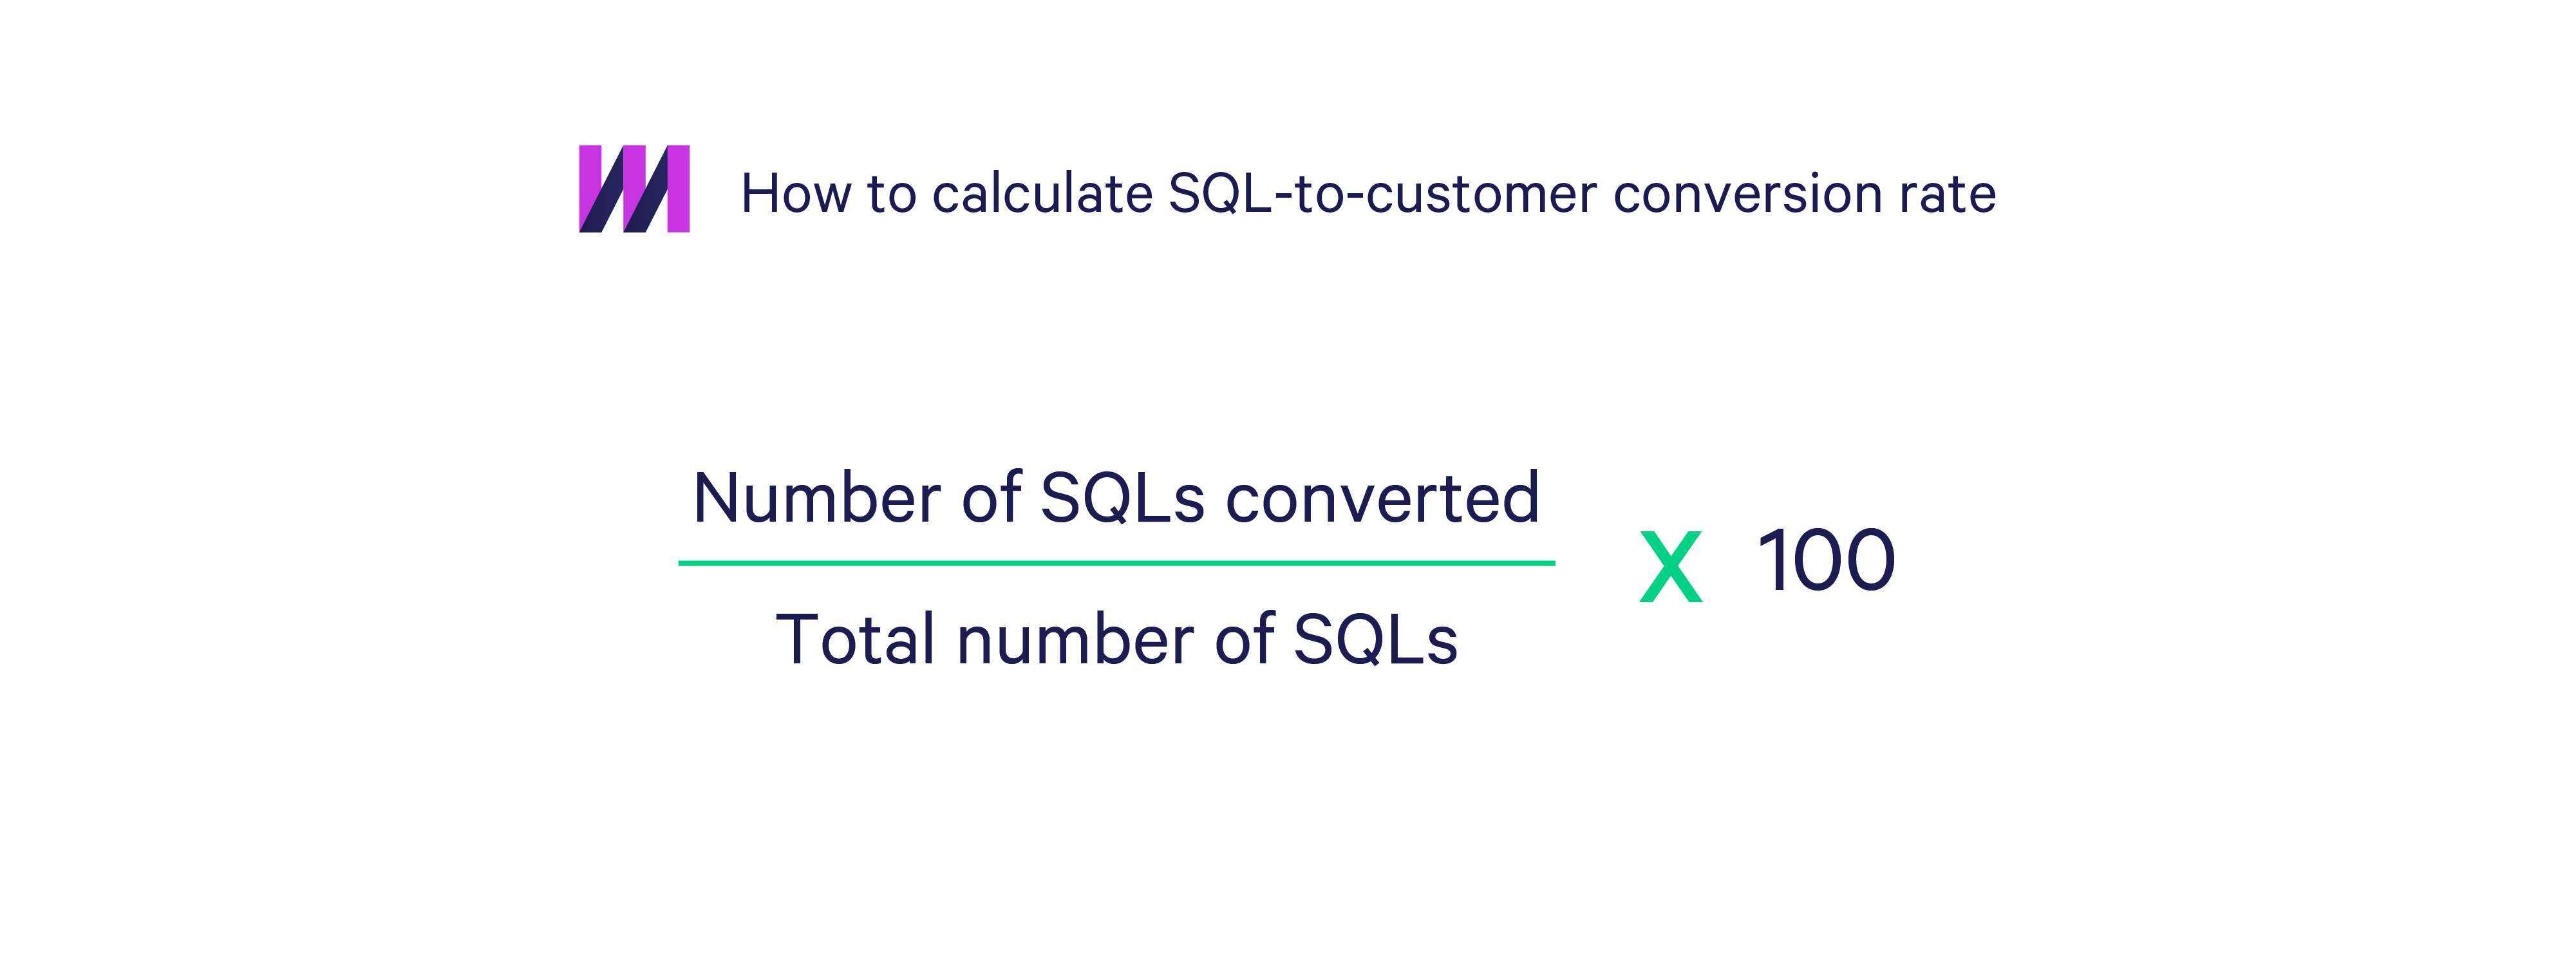 How to calculate SQL-to-customer conversion rate